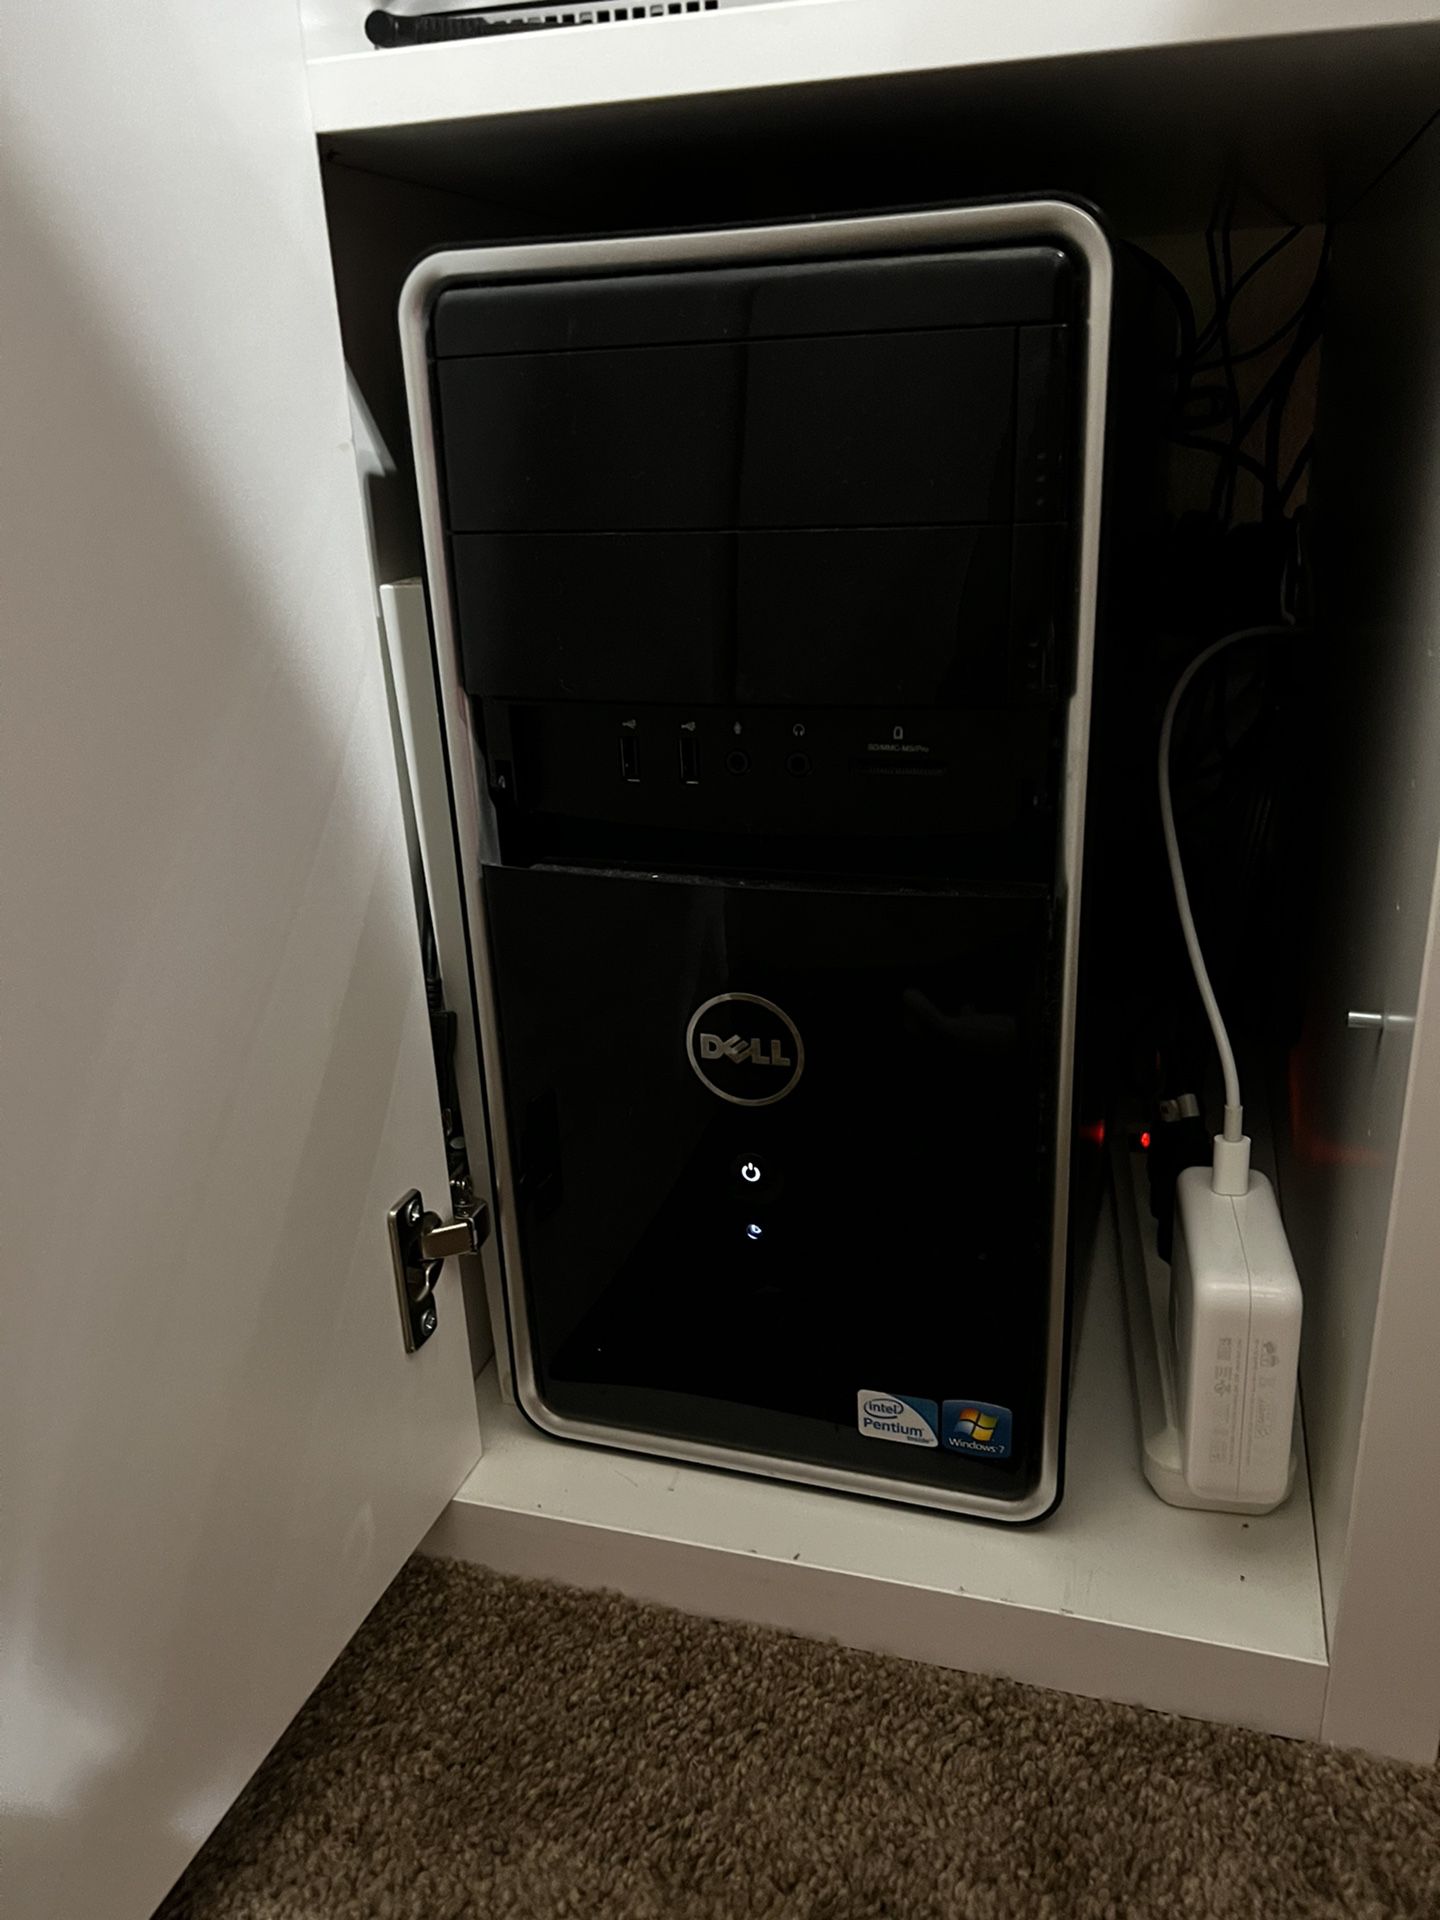 Dell Inspiration PC With Speakers